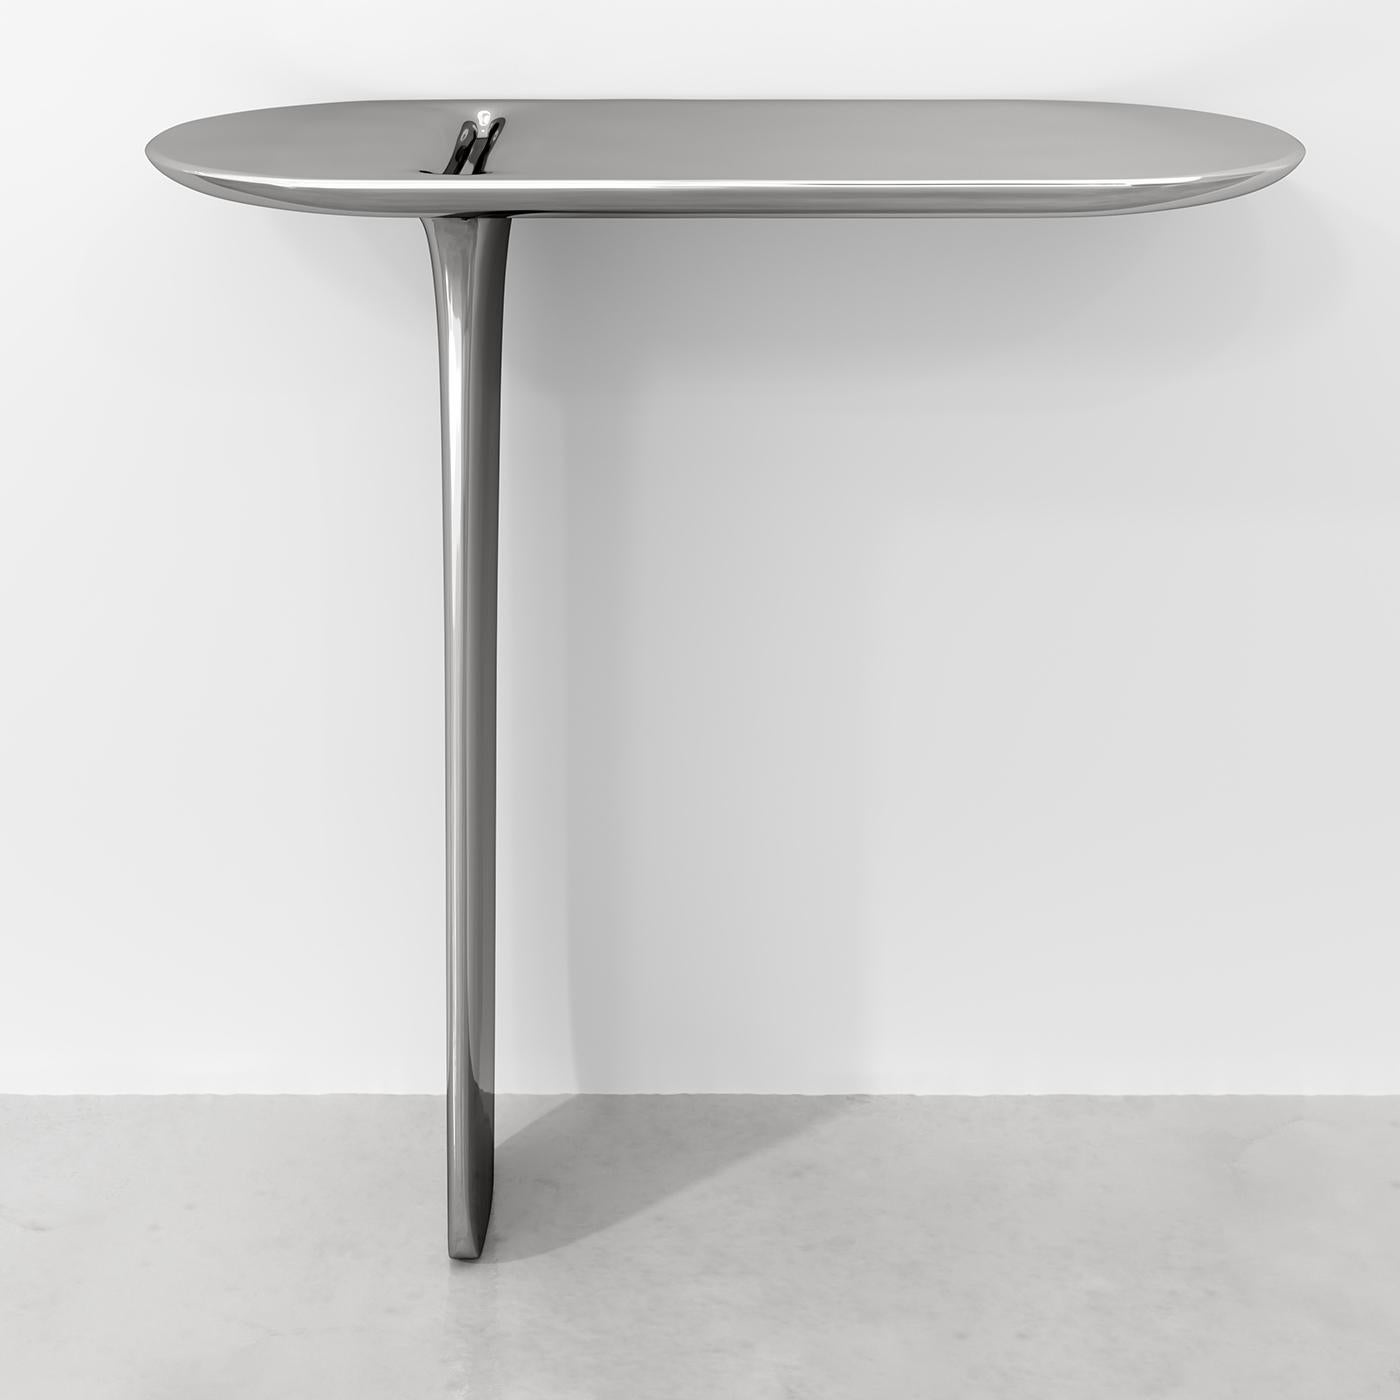 Ipsilon console is designed by Matteo Cibicwith a liquid shape. Light and thin, Ipsilon stands elegantly and perfectly balanced on one leg. 
 